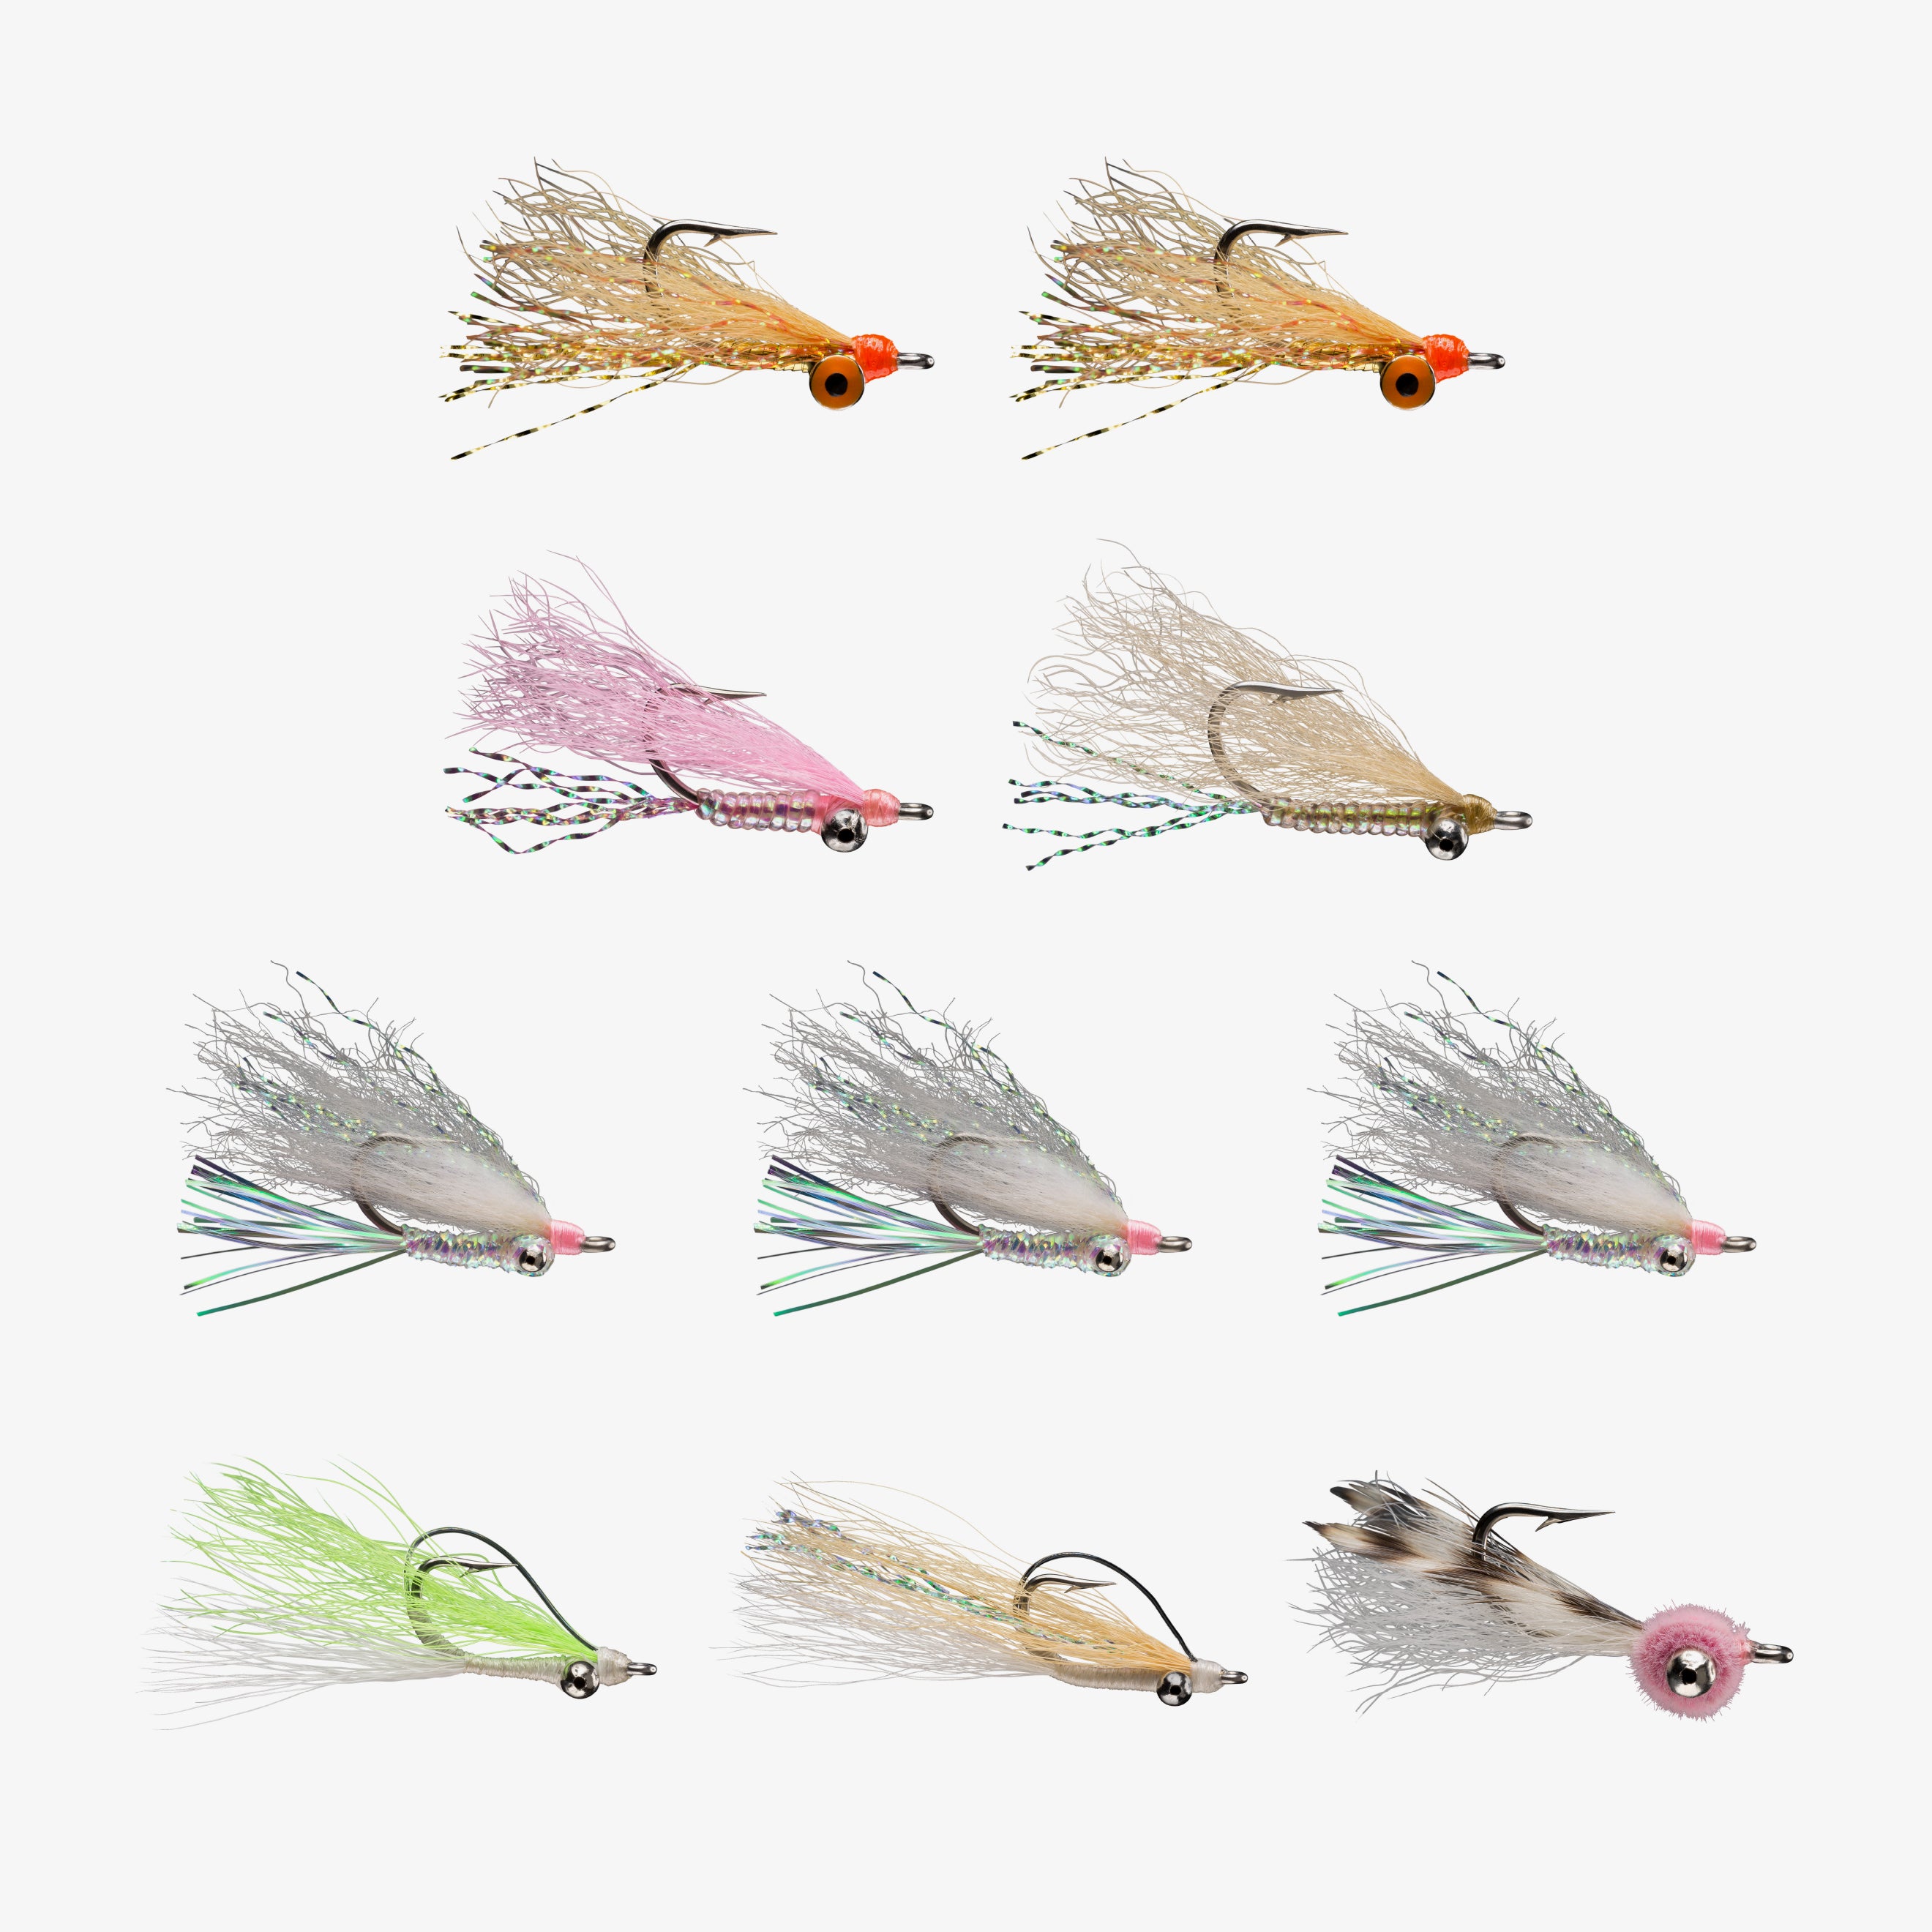 Rio Bonefish Knotless Tapered Leader - 3 Pack, Fly Fishing Flies For Less